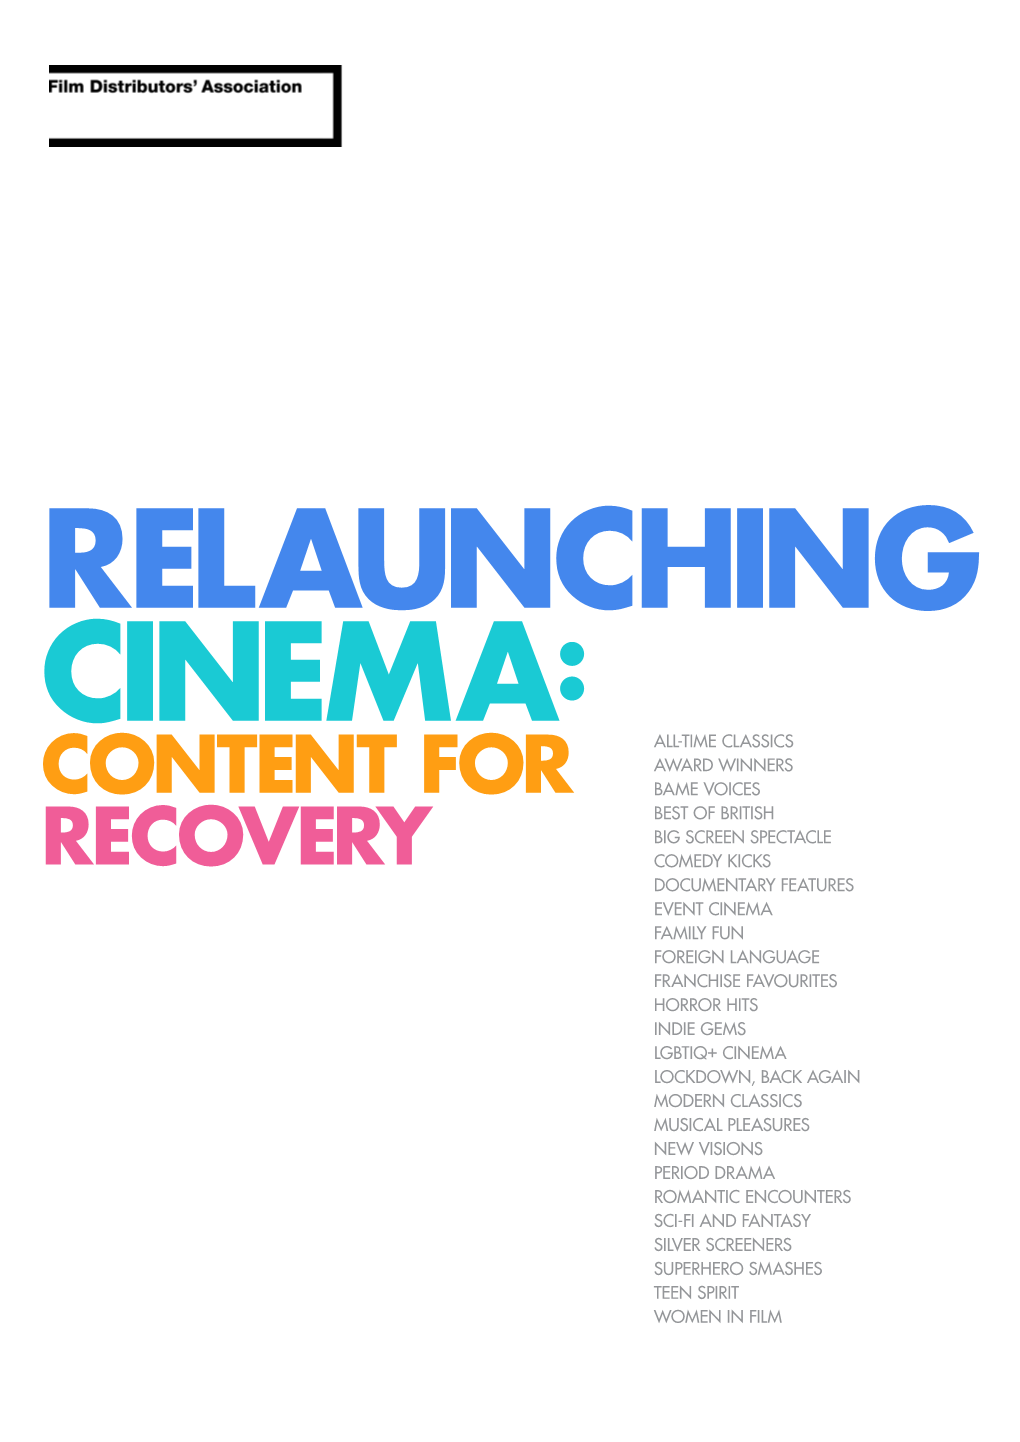 Relaunching Cinema: Content for Recovery 1 Film Collections